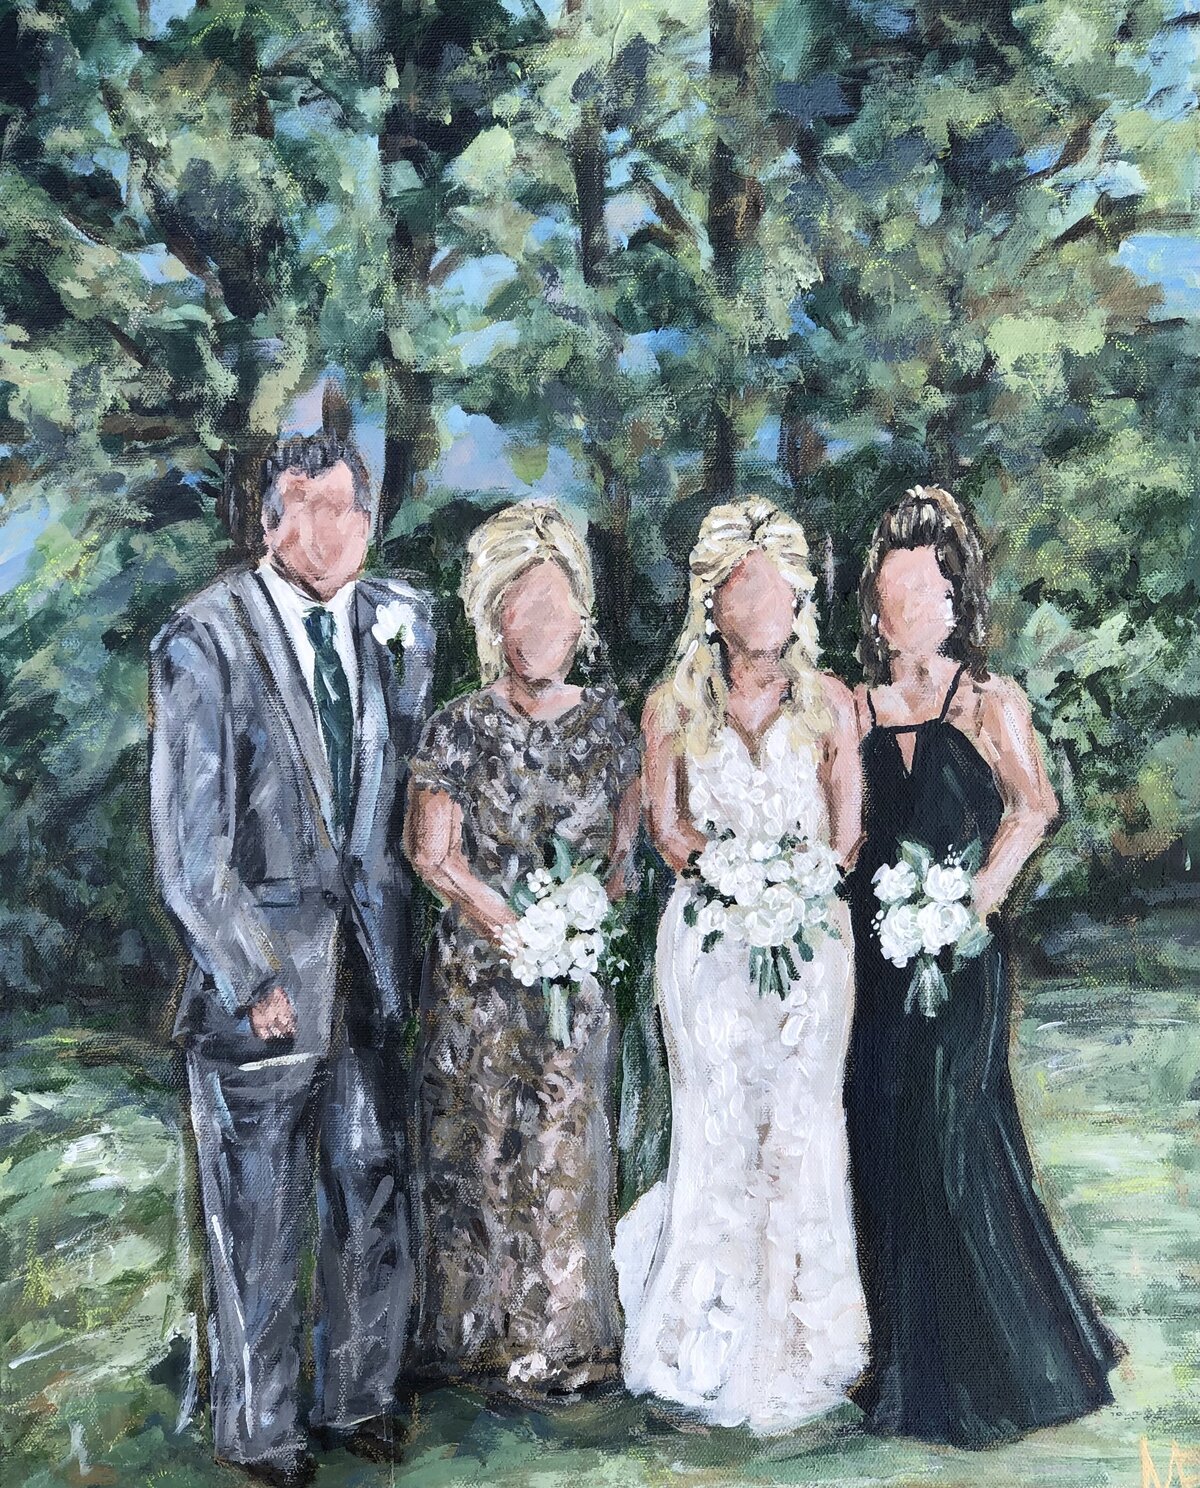 Commissioned painting by Miriam Shufelt, family wedding portrait